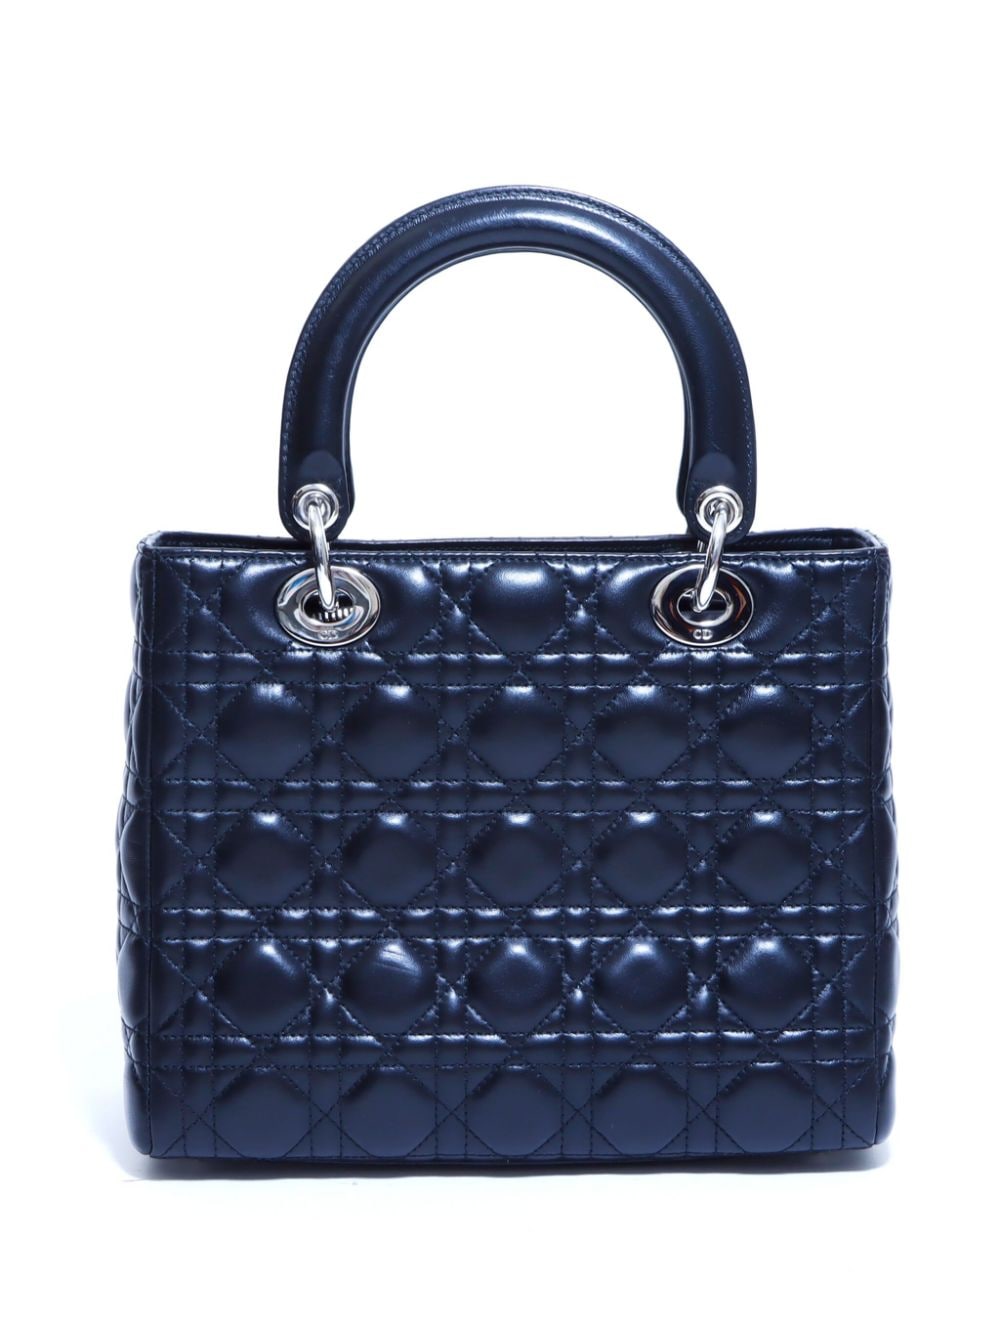 Image 2 of Christian Dior Pre-Owned Cannage Lady Dior two-way handbag